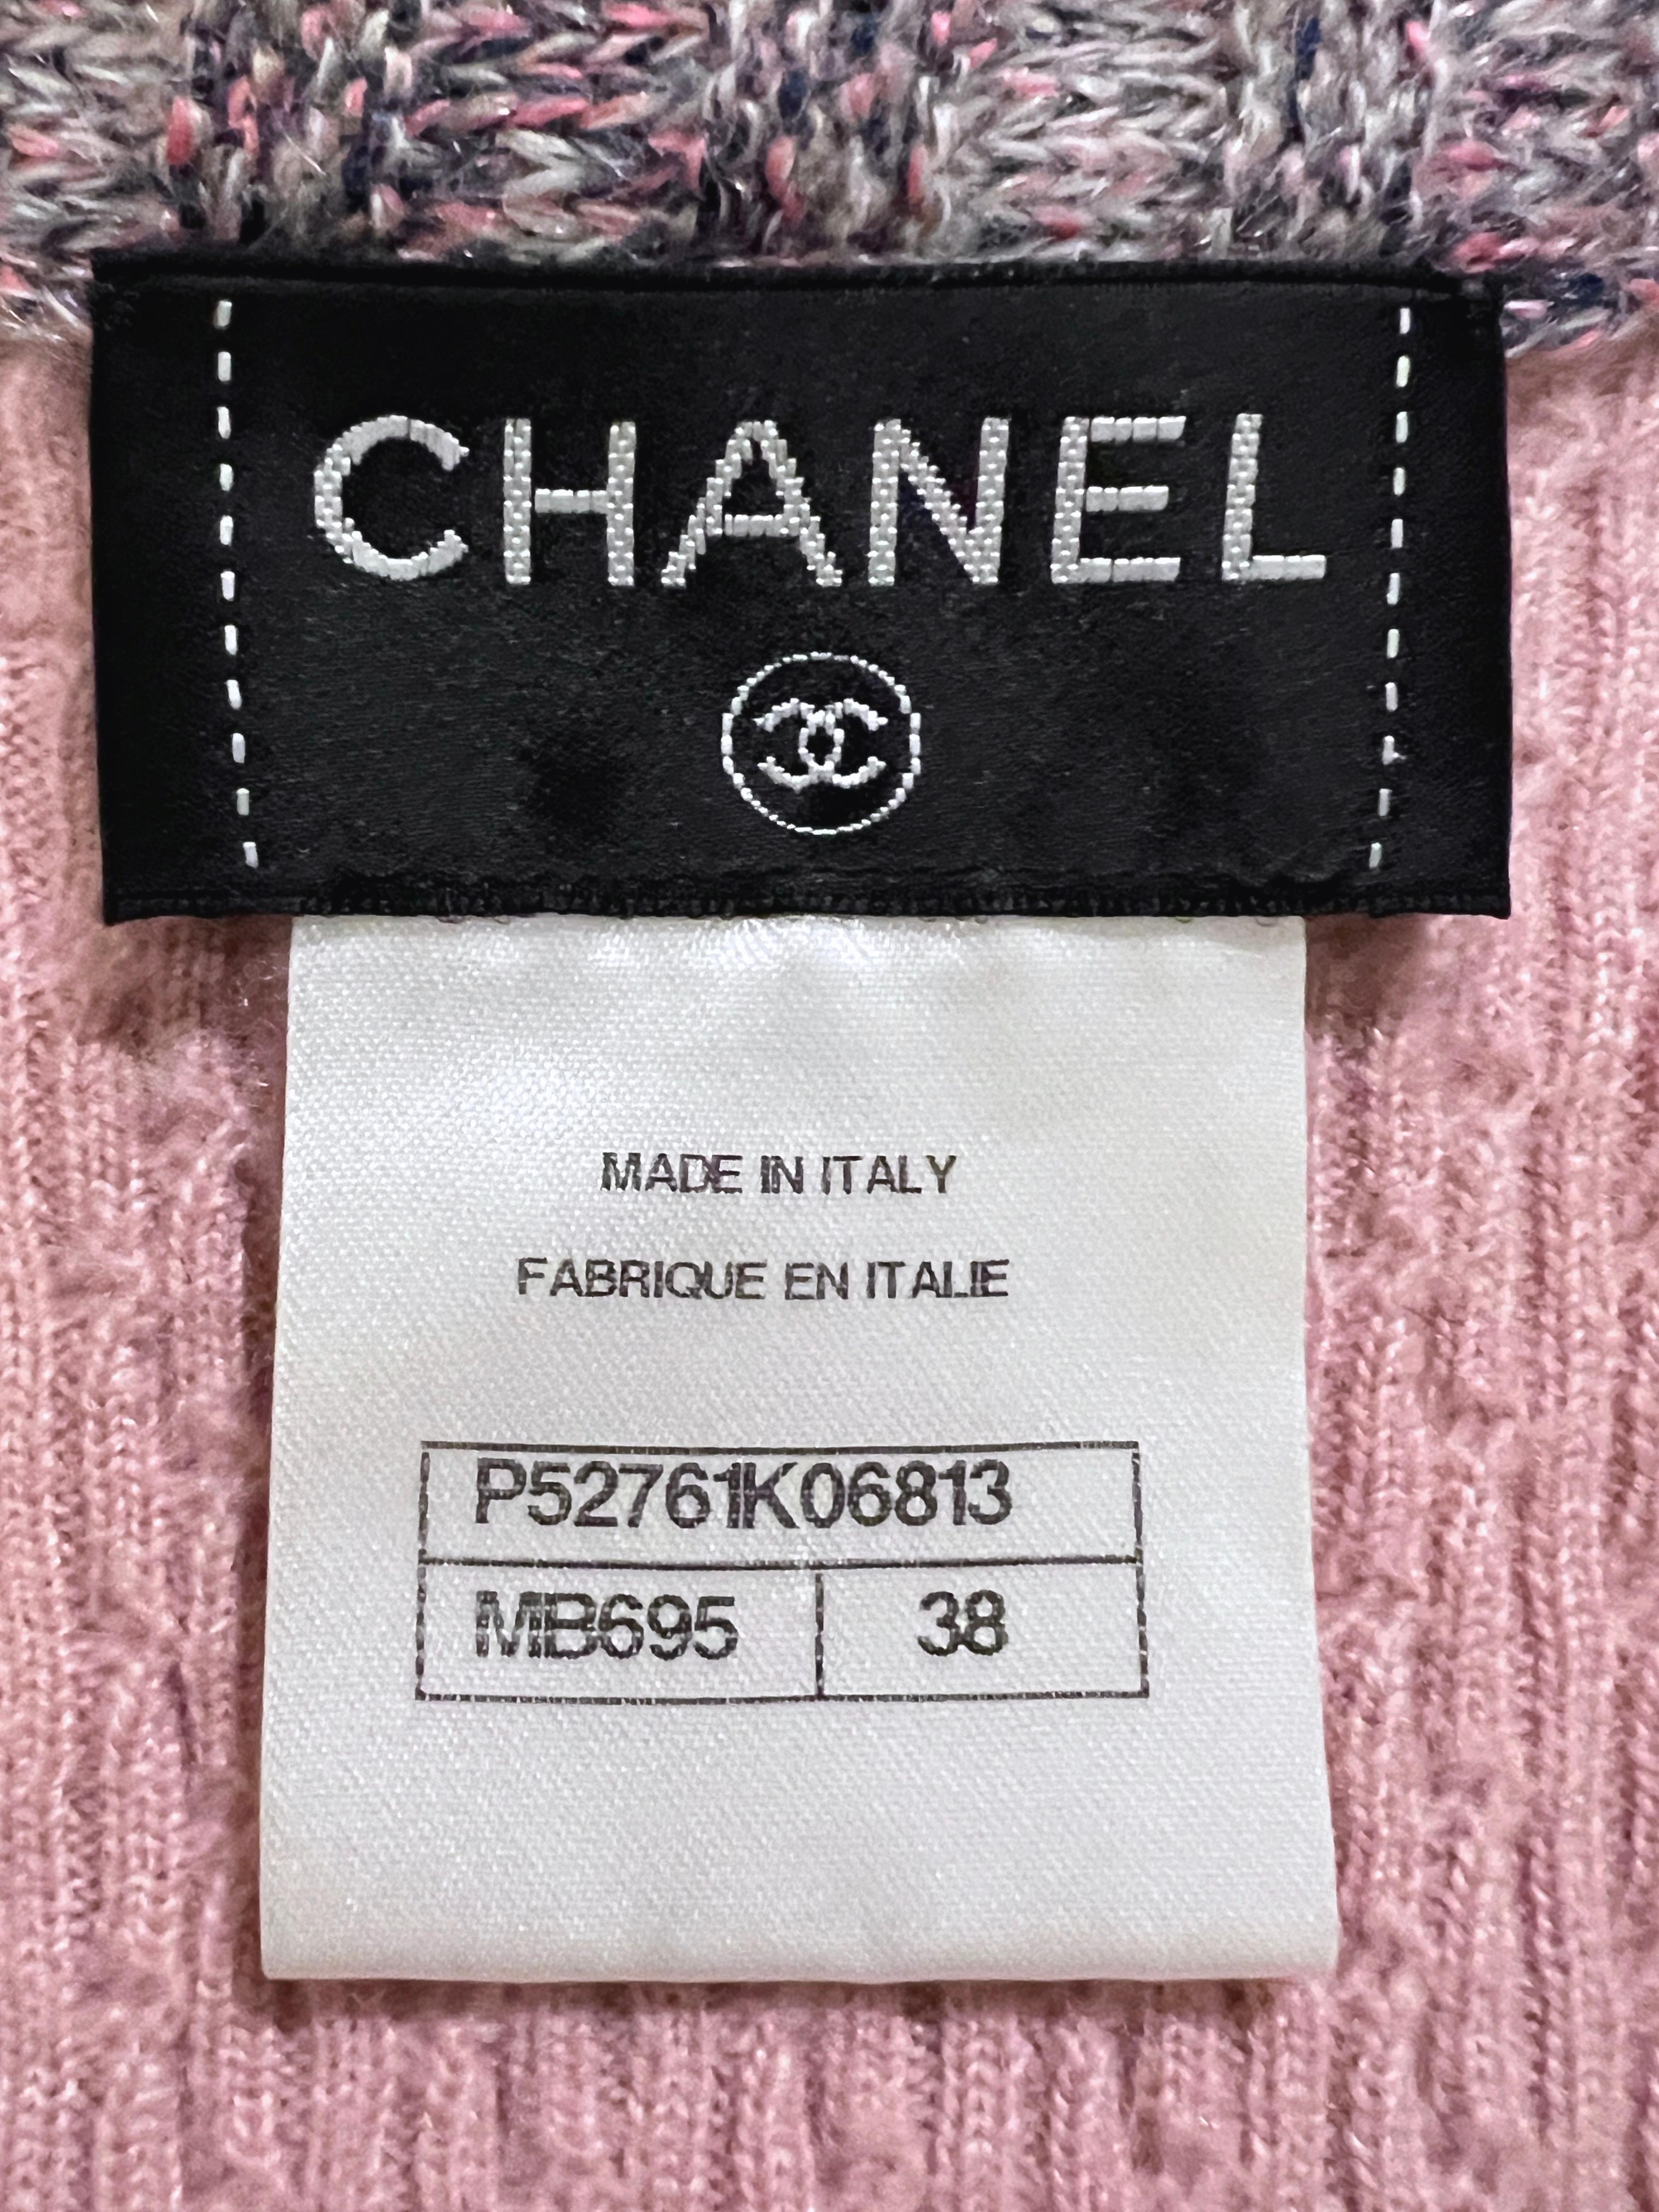 Chanel Iconic Coco Brasserie Quilted Jacket Dress For Sale 13